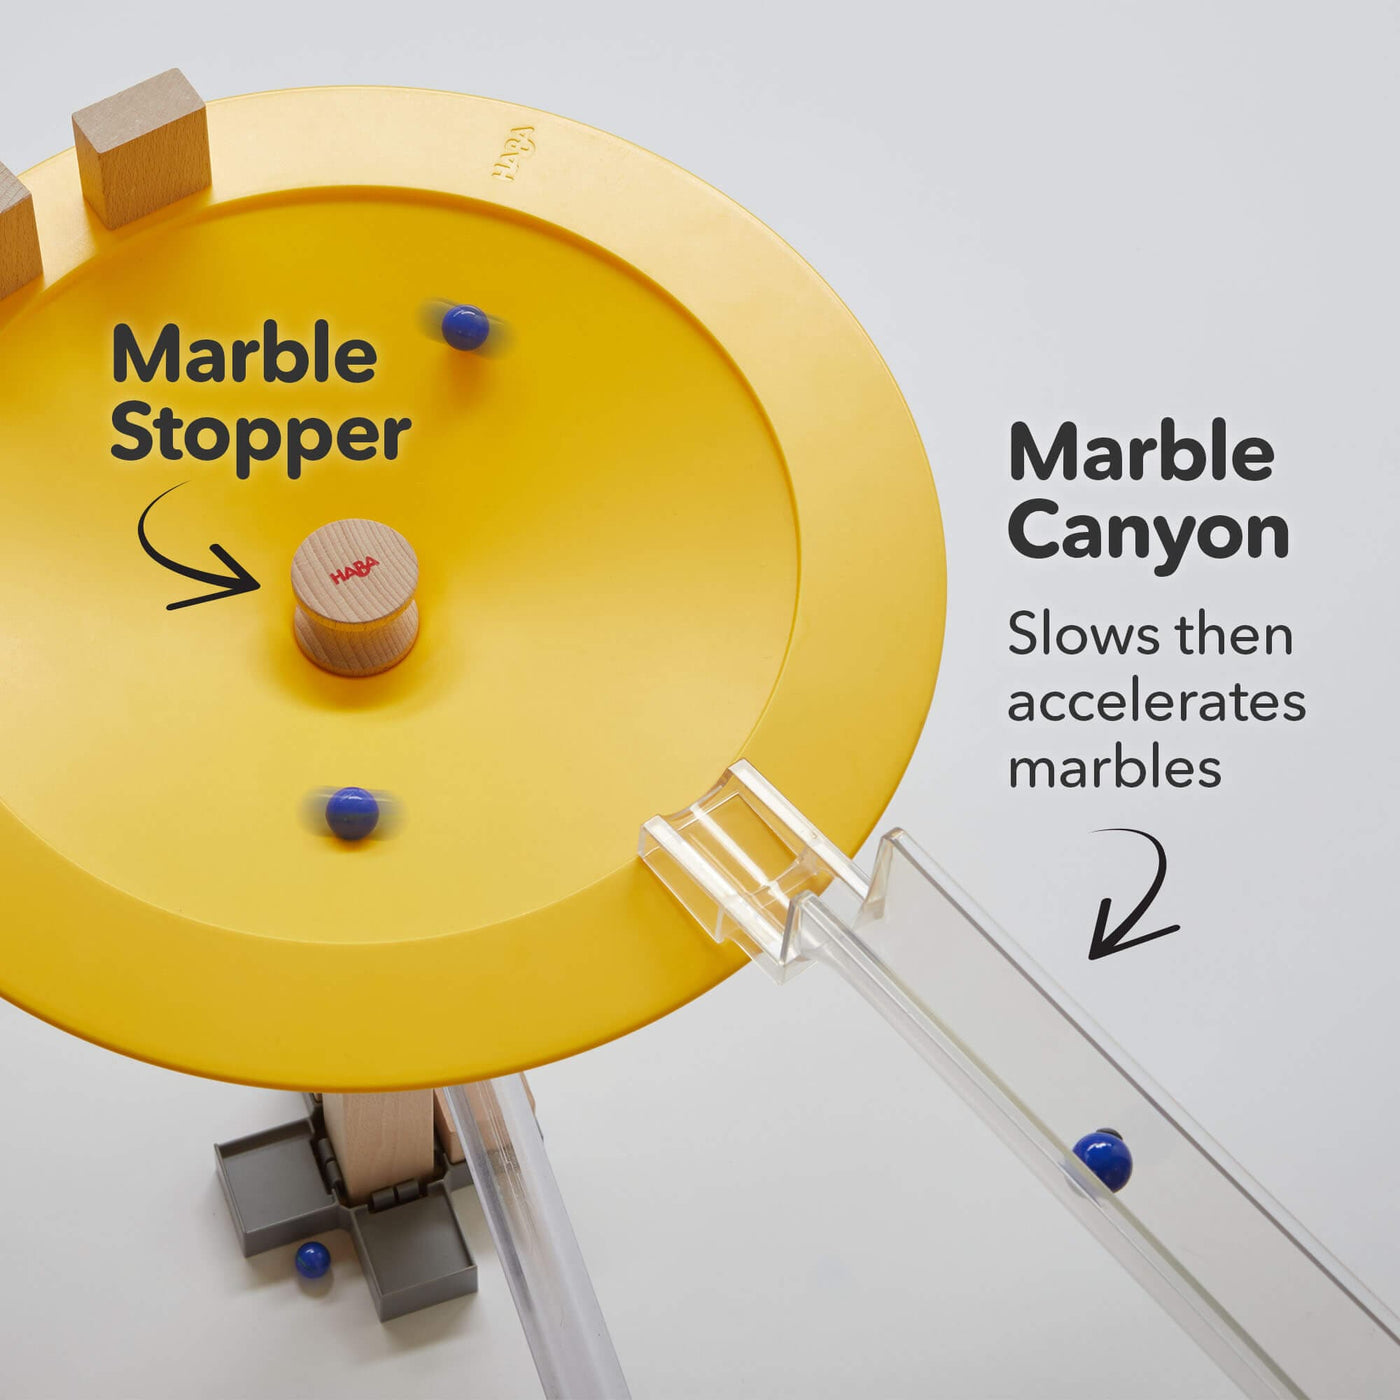 Marble Run Master Construction Set - Marble stopper and marble canyon that slows that accelerates marbles